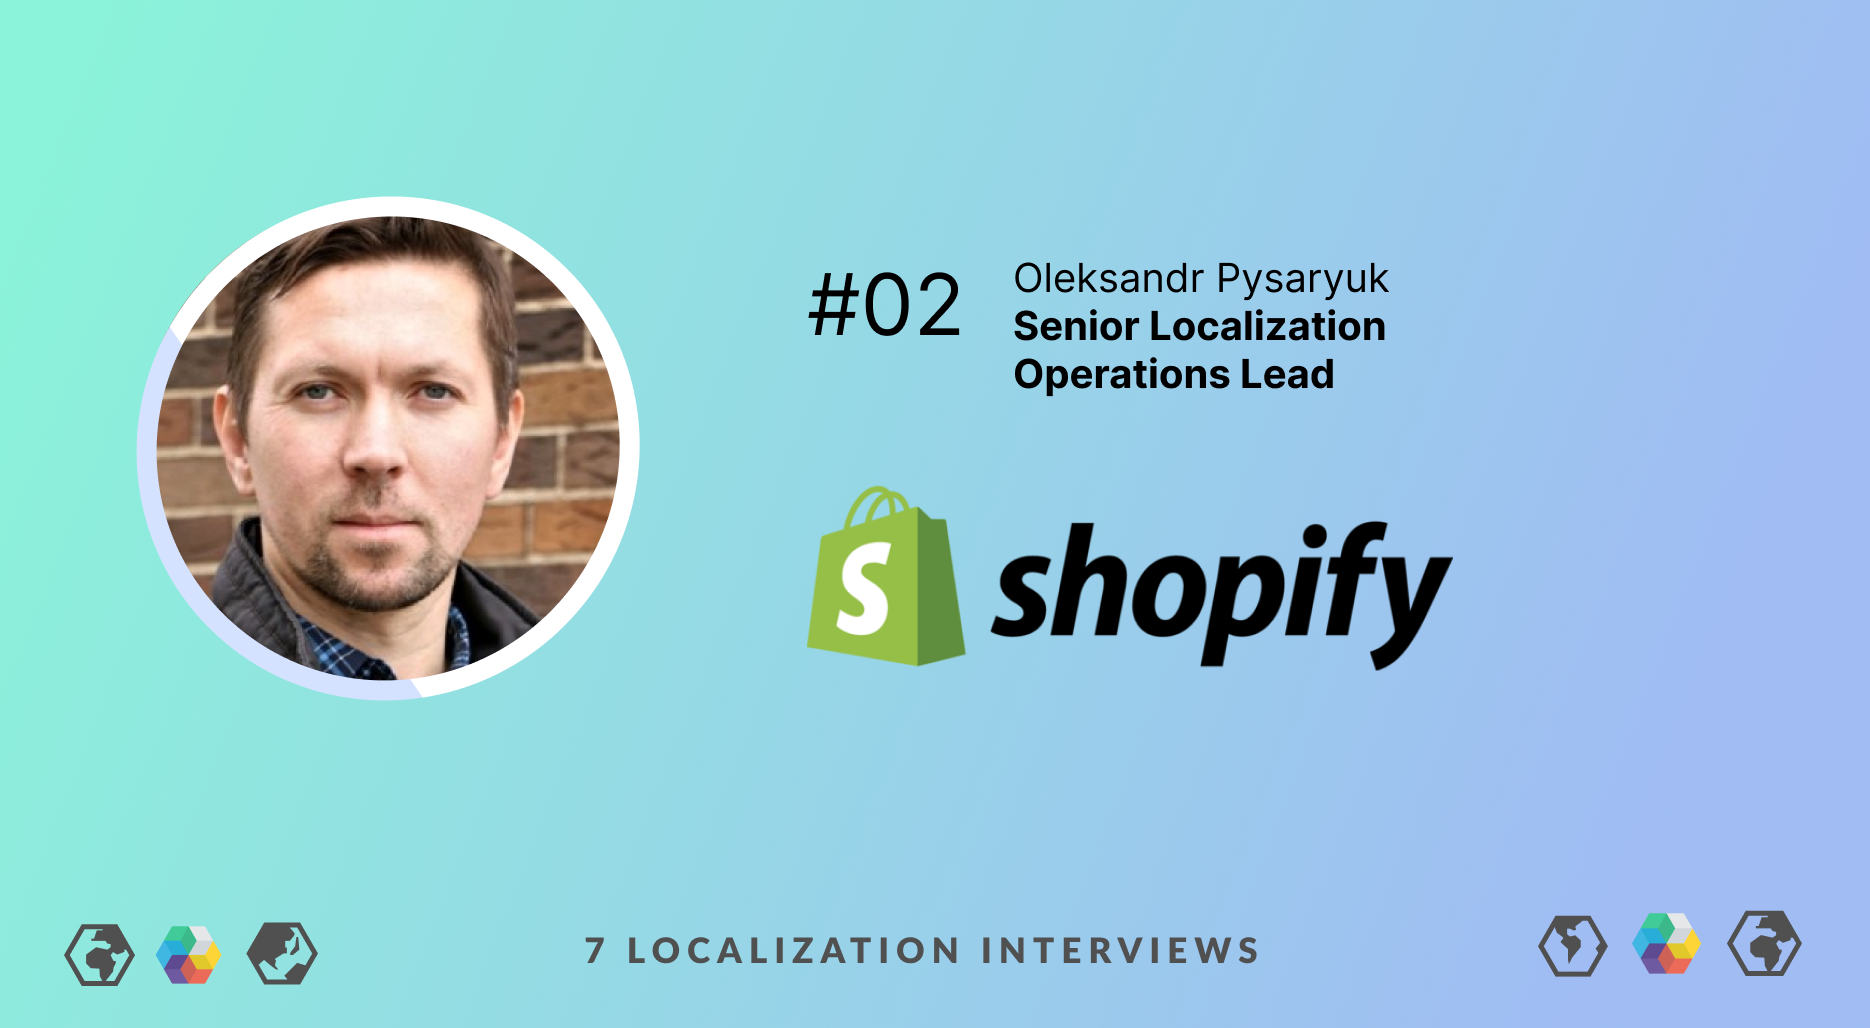 Building the team for your business; 3 tips for localization teams from Shopify